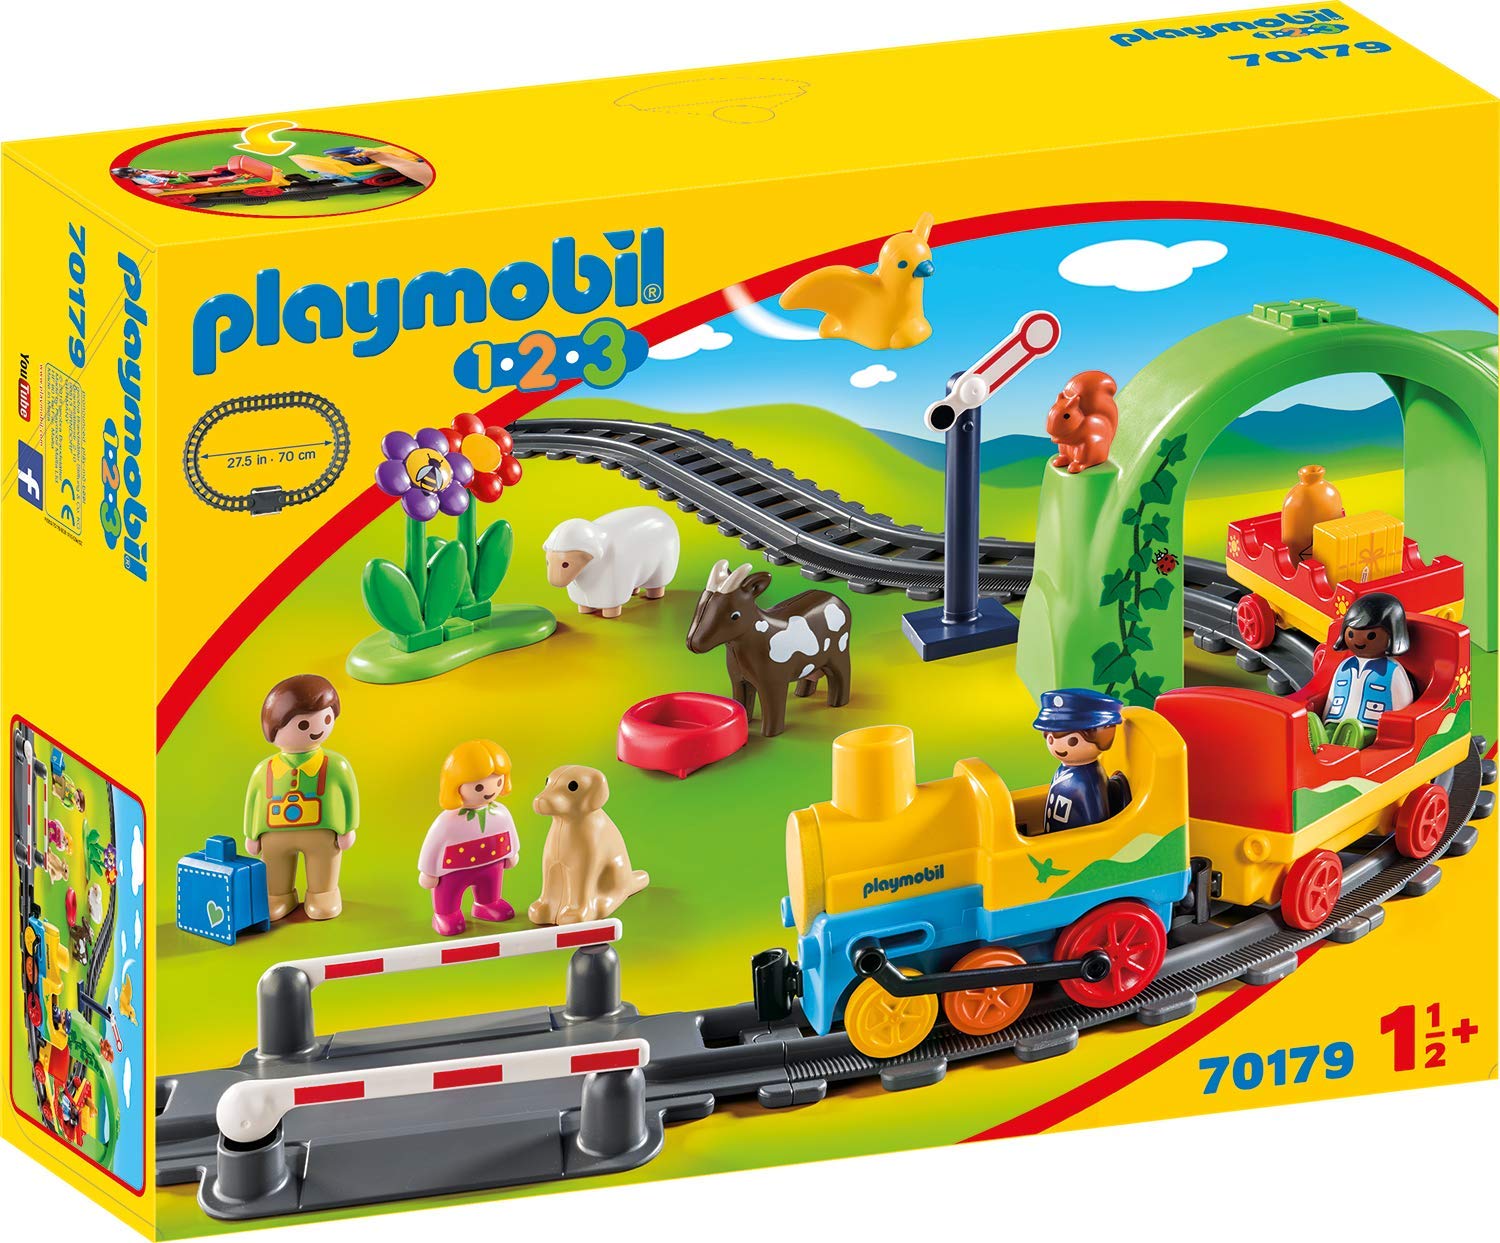 Playmobil 70179 1.2.3 My First Railway, Colourful